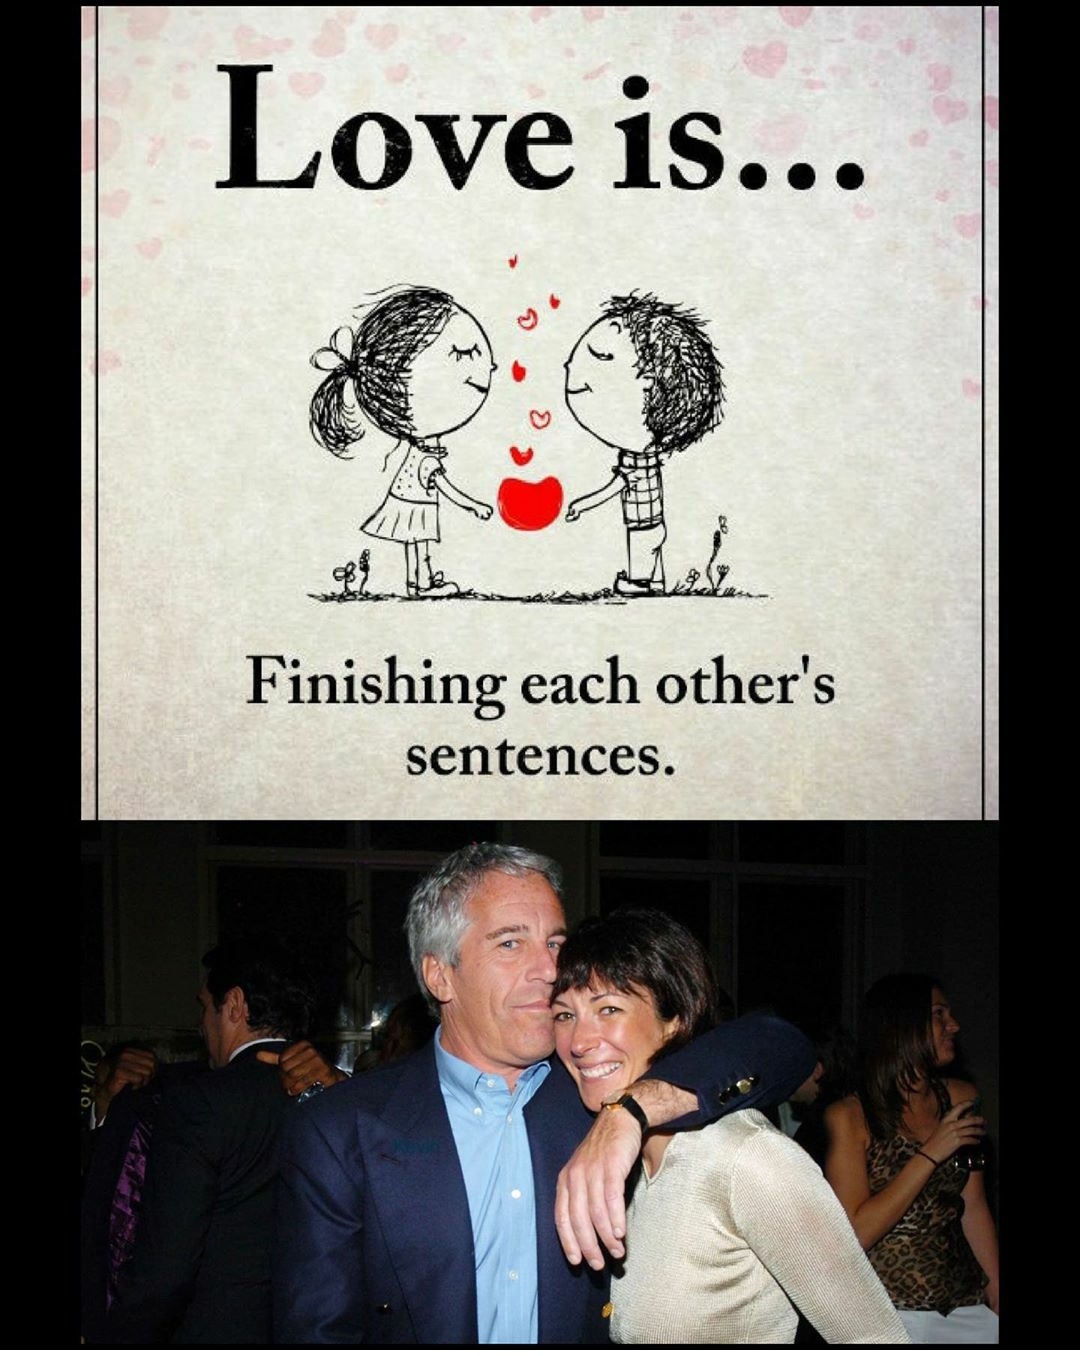 sentences about love - Love is... Te Finishing each other's sentences.